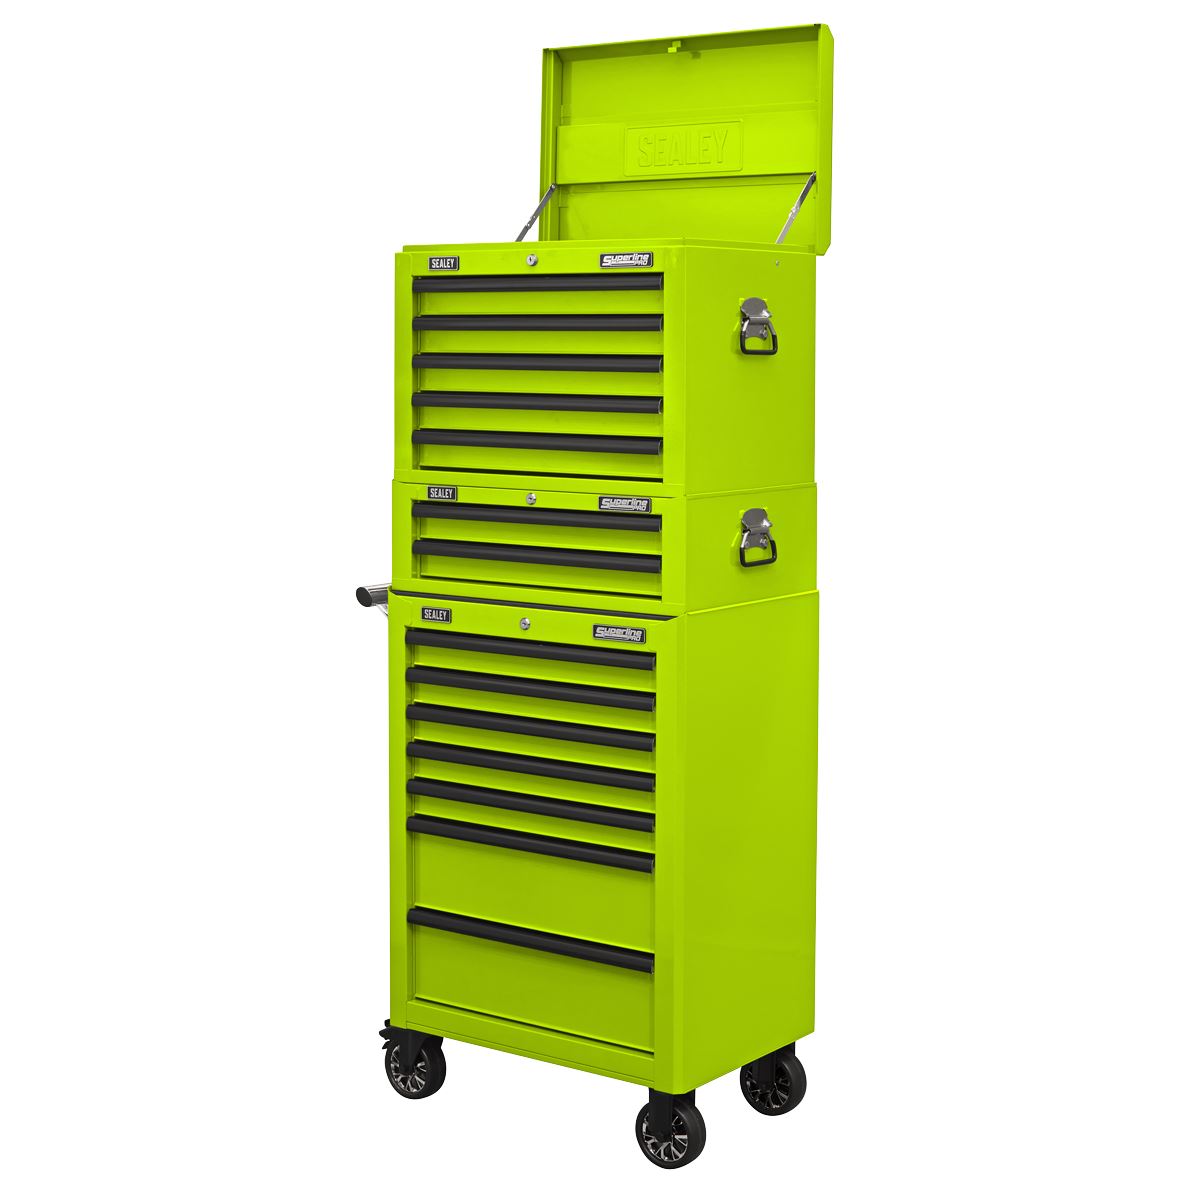 Sealey Superline Pro Topchest, Mid-Box Tool Chest & Rollcab Combination 14 Drawer with Ball-Bearing Slides - Green